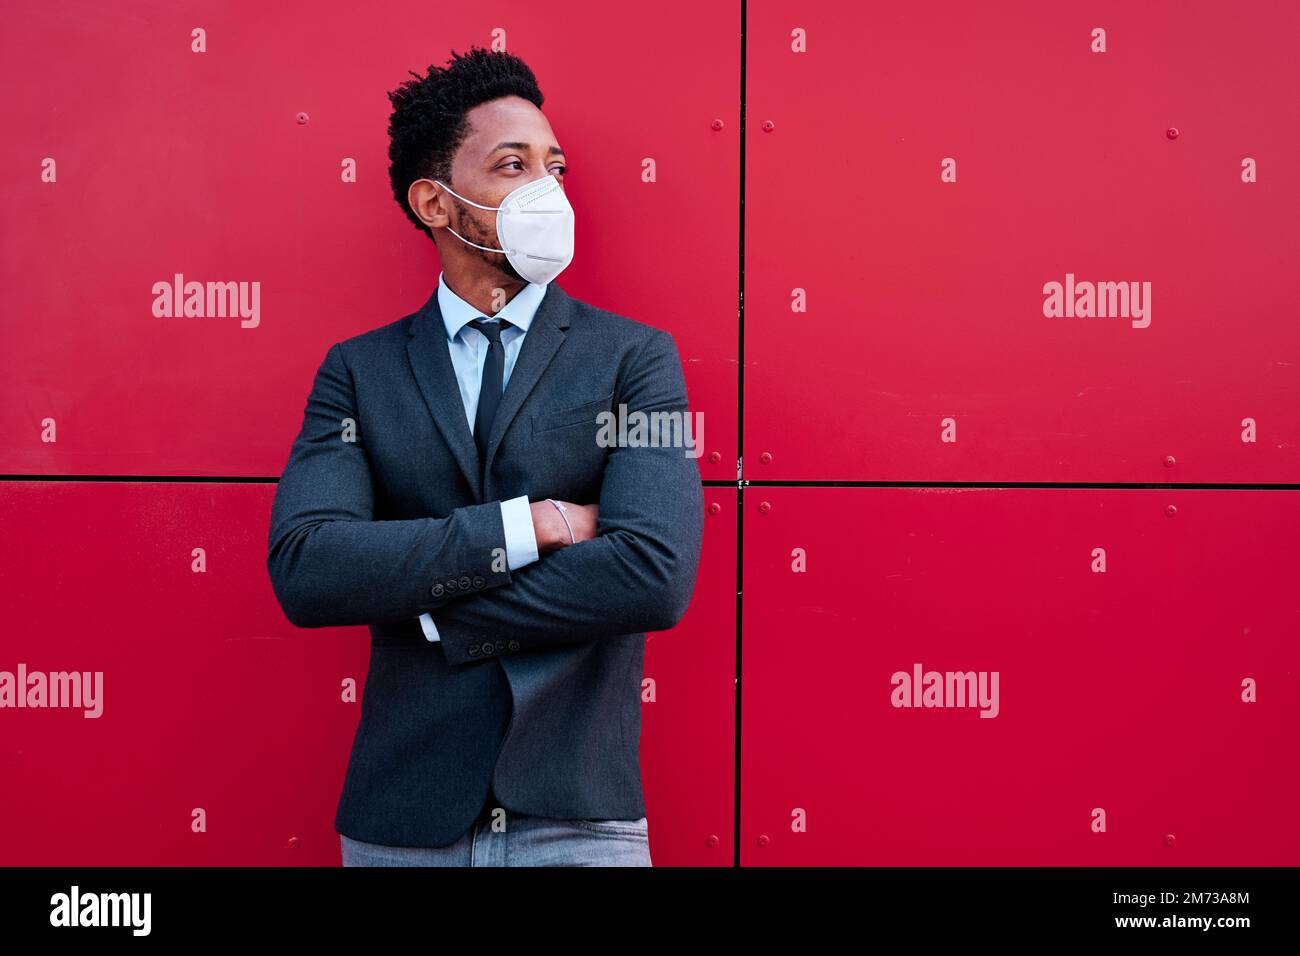 Male entrepreneur with face mask looking away while standing with arms crossed outdoors. Stock Photo